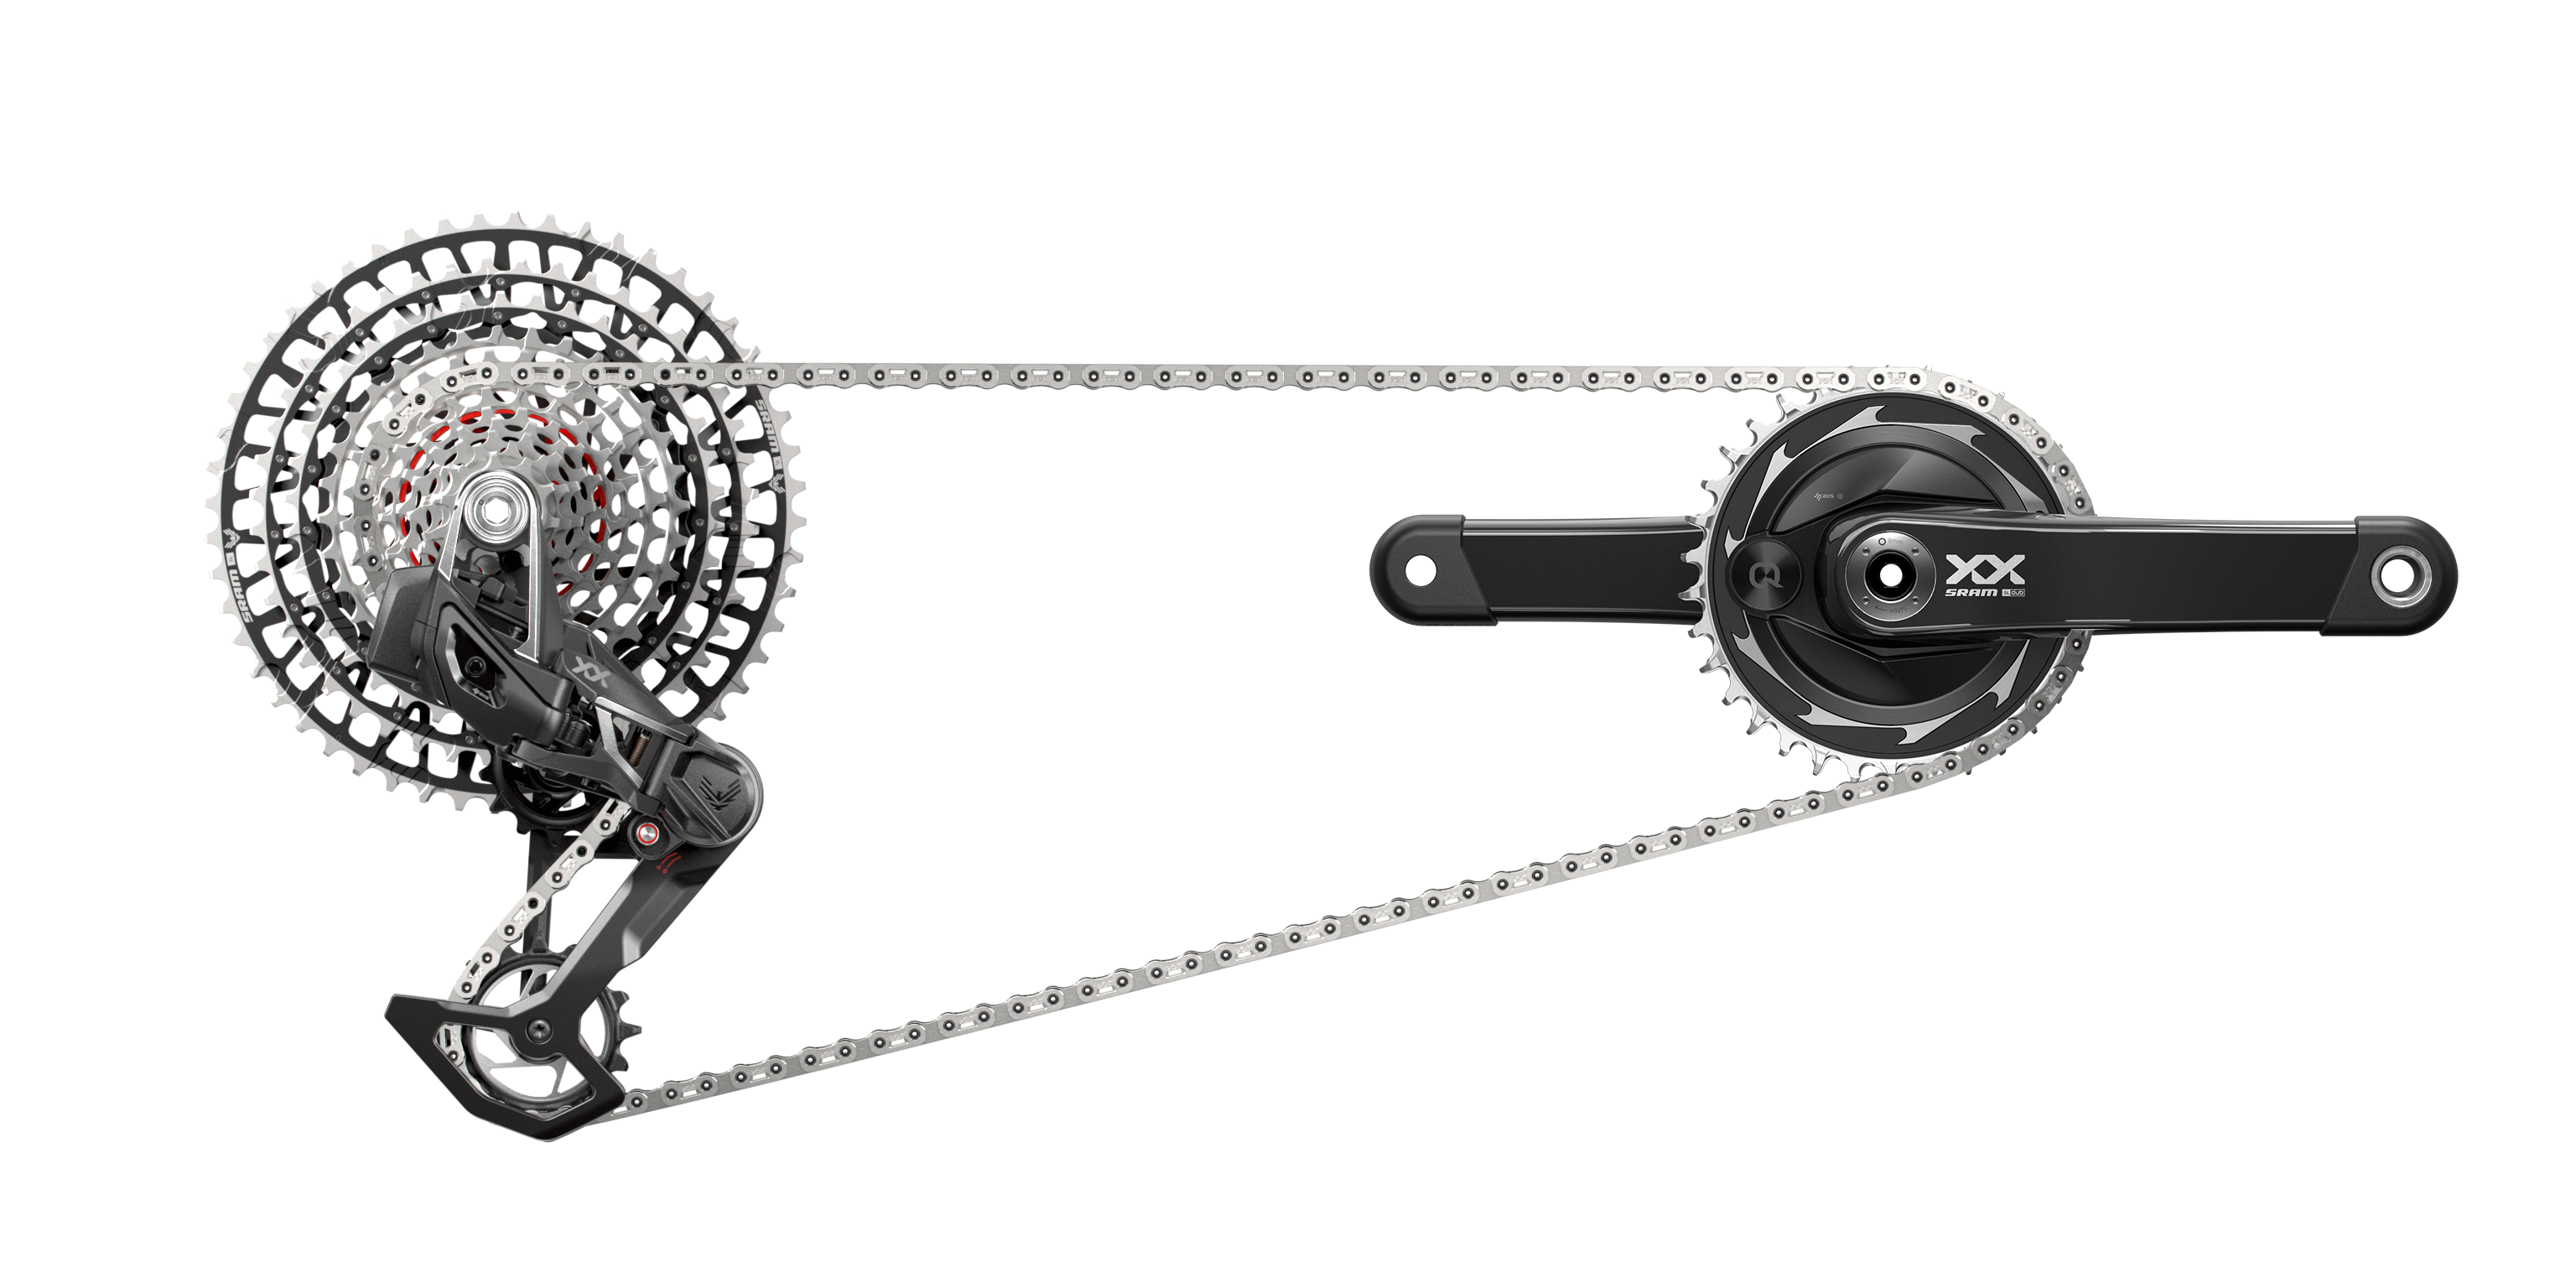 SRAM XX SL EAGLE T-TYPE AXS GROUPSET WITH POWER METER